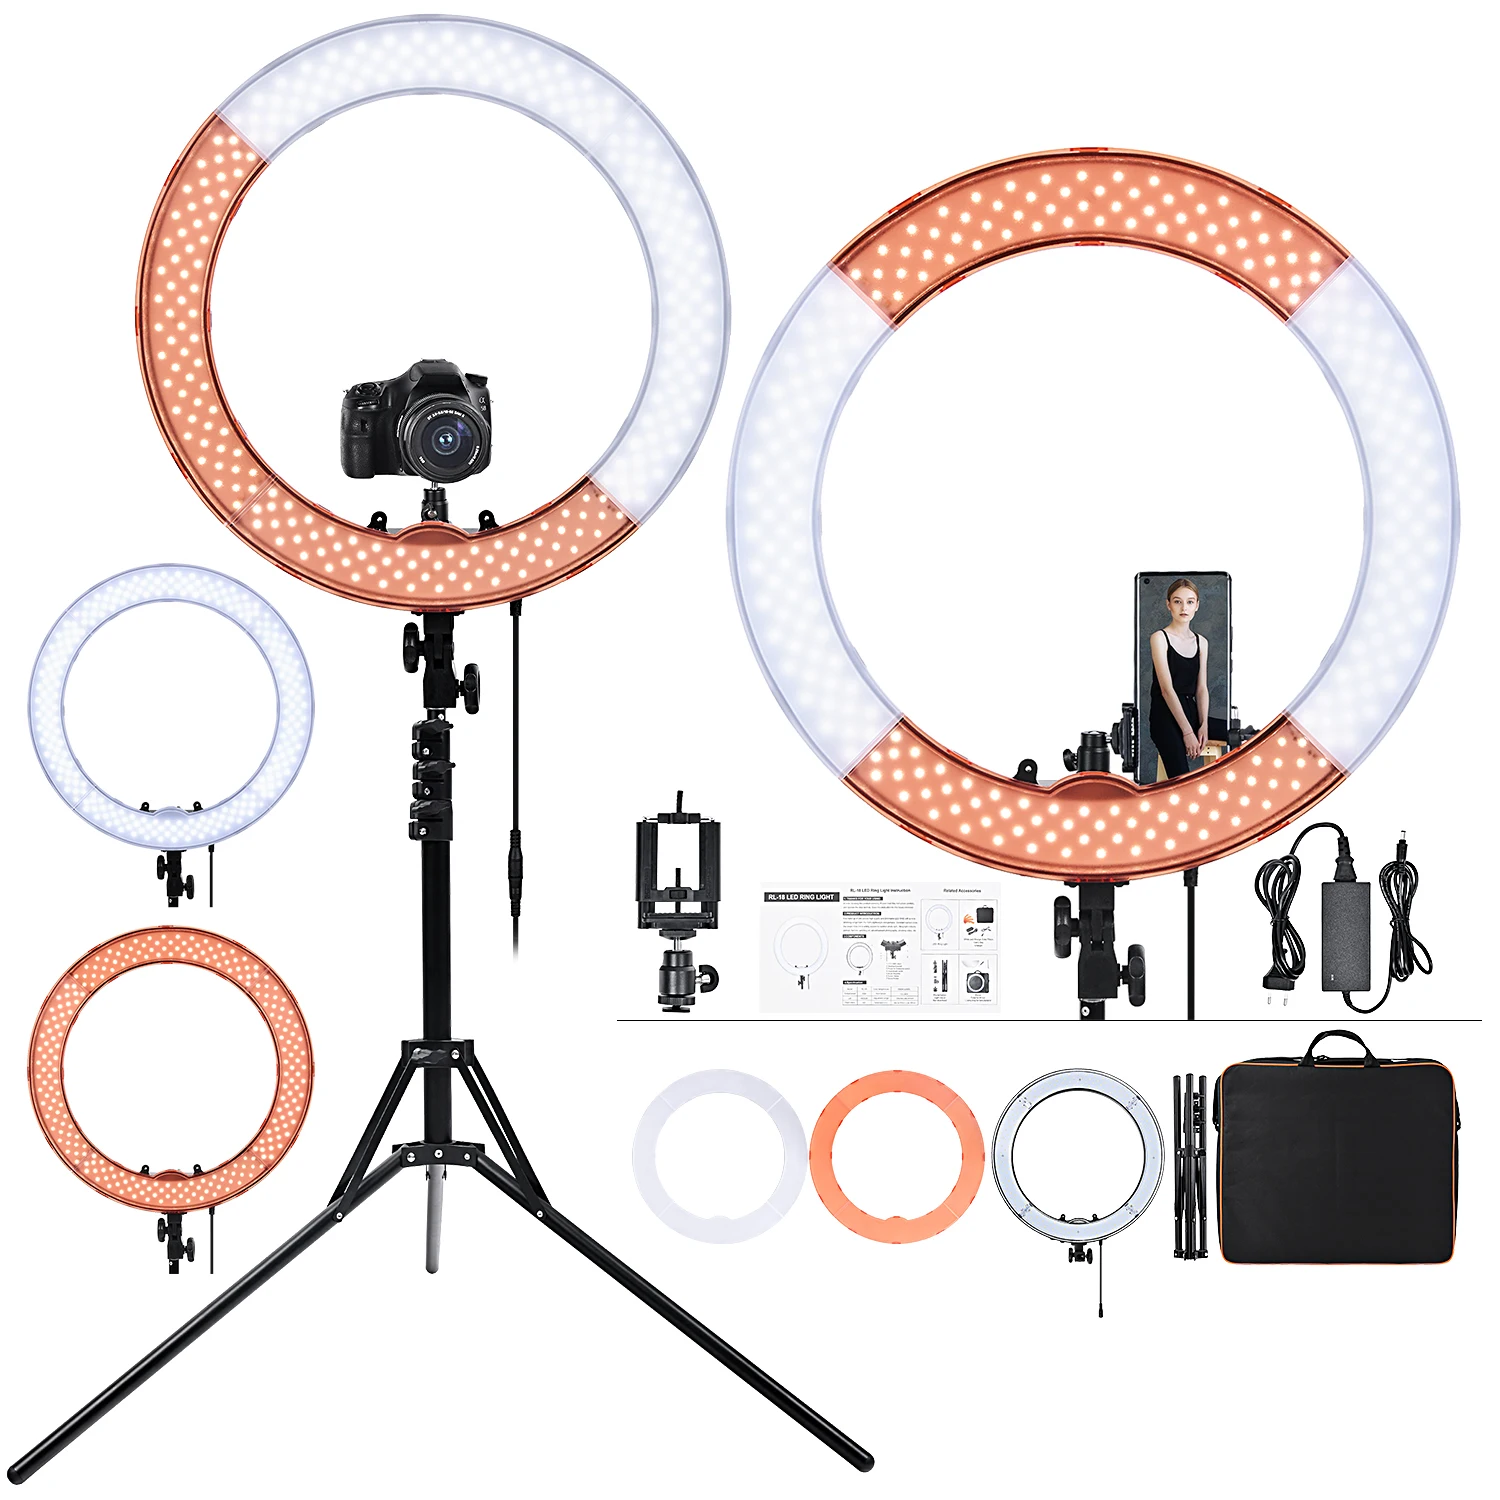 

FOSOTO RL18 hot sale Led Ring Light 18 inch photography light selfie Ring lamp with tripod stand For Youtube Makeup Tik tok